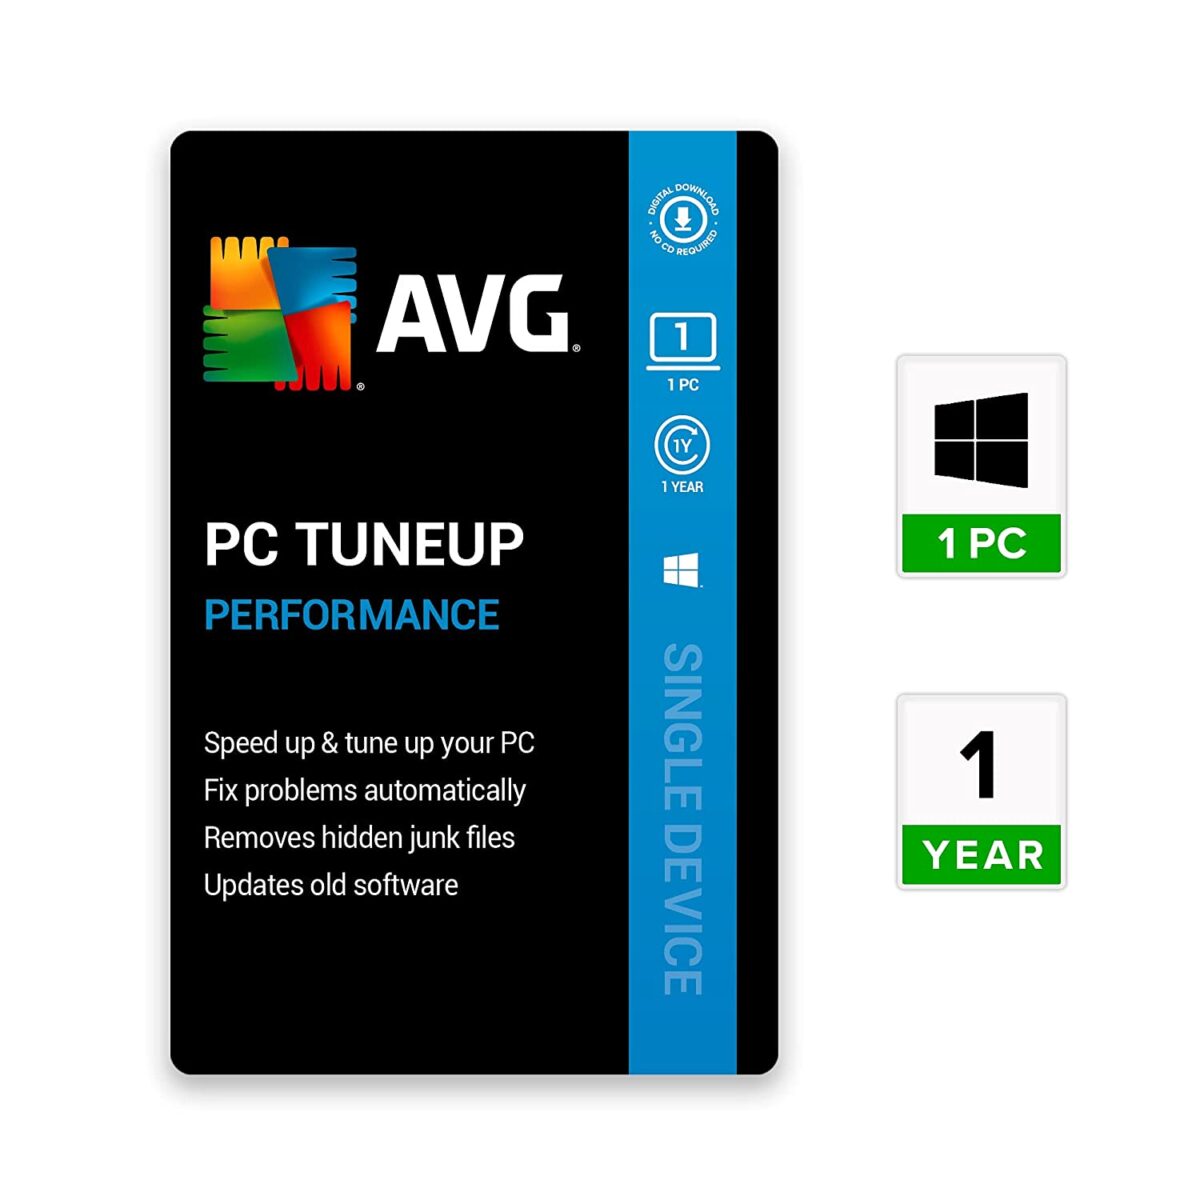 AVG TuneUp for PC